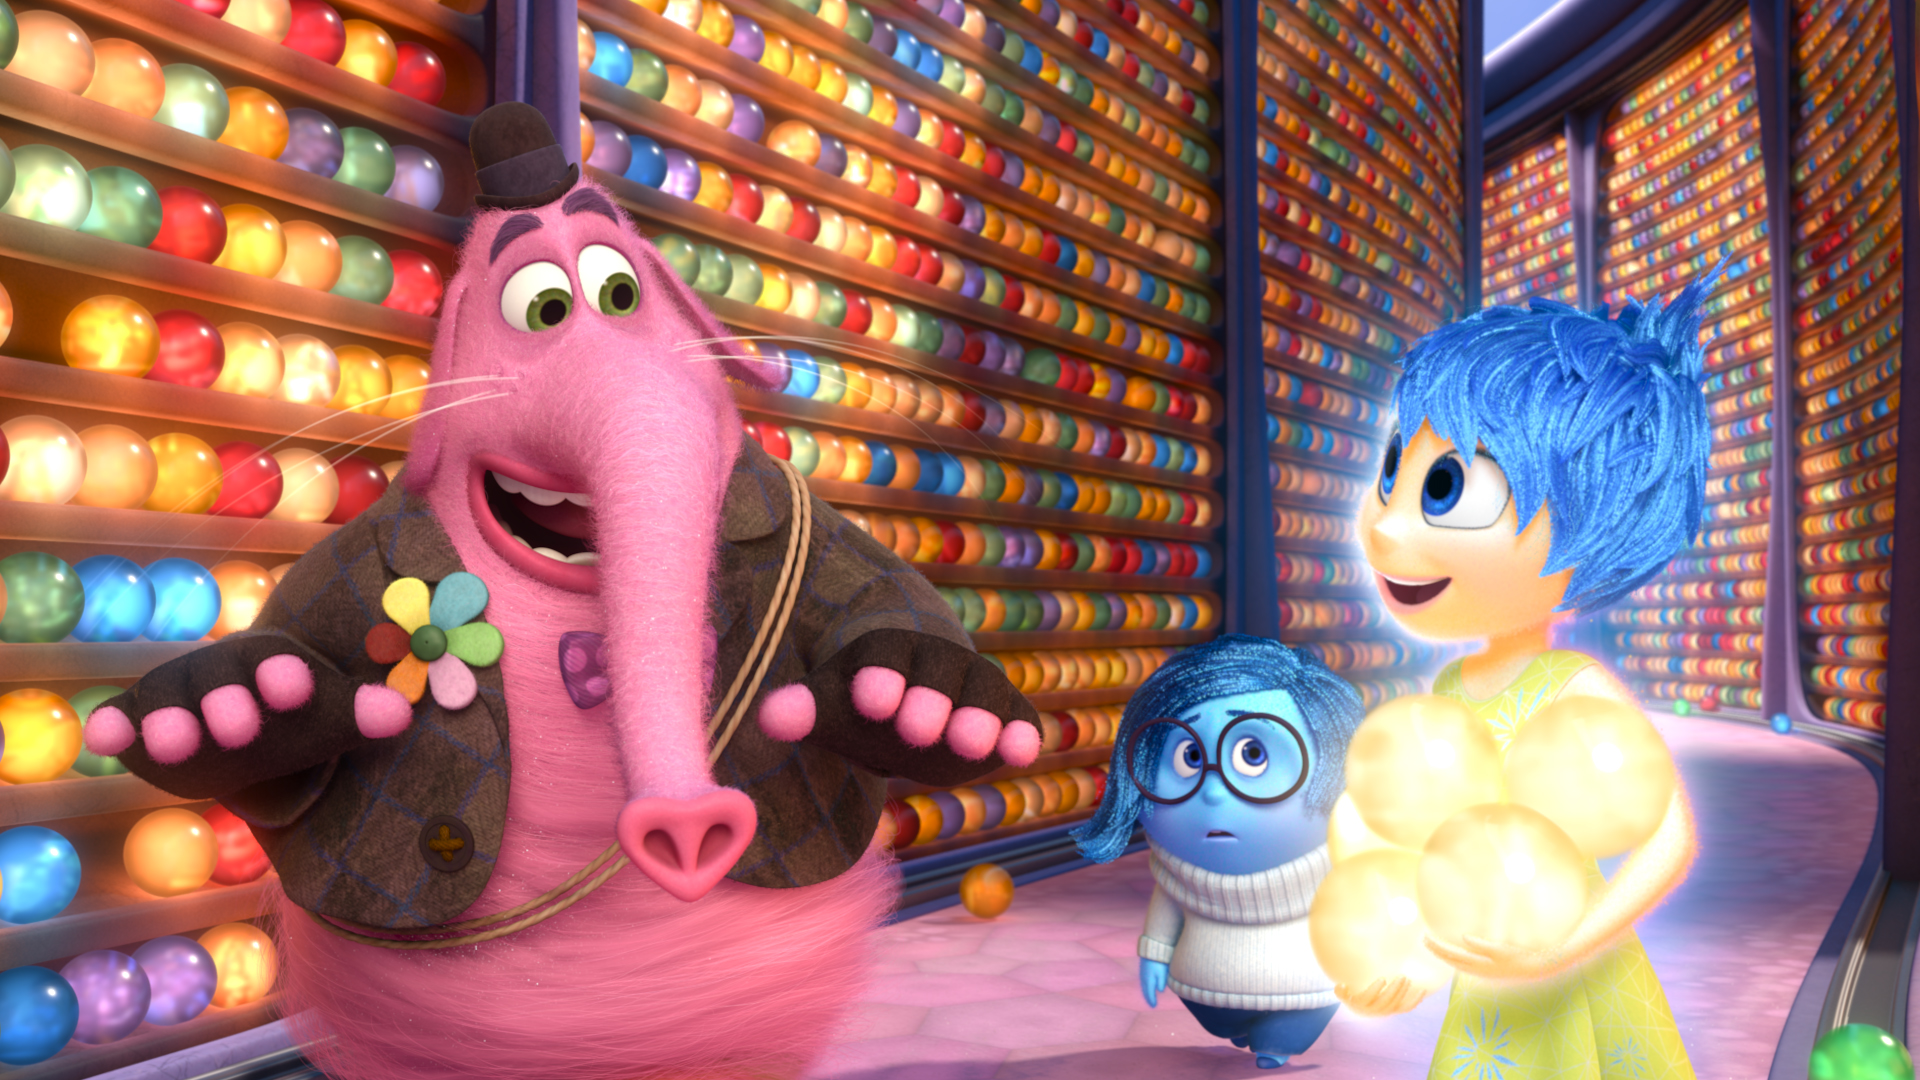 INSIDE OUT – Pictured (L-R): Bing Bong, Sadness, Joy. ©2015 Disney•Pixar. All Rights Reserved.